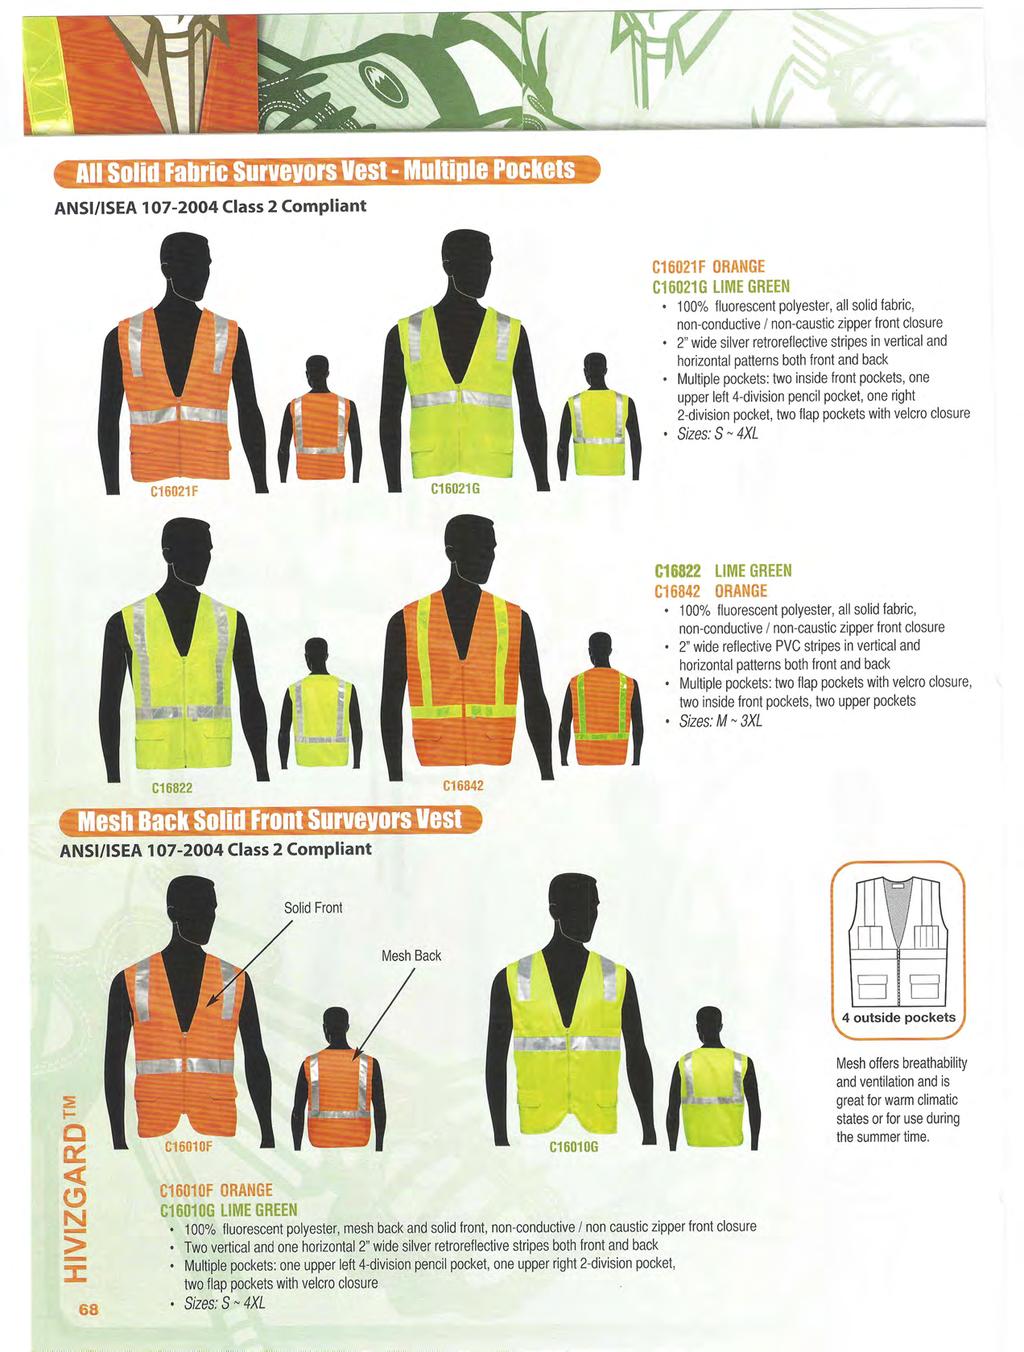 C1621F ORANGE C1621G LIME GREEN 1% fluorescent polyester, all solid fabric, non-conductive I non-caustic zipper front closure 2" wide silver retroreflective stripes in vertical and horizontal